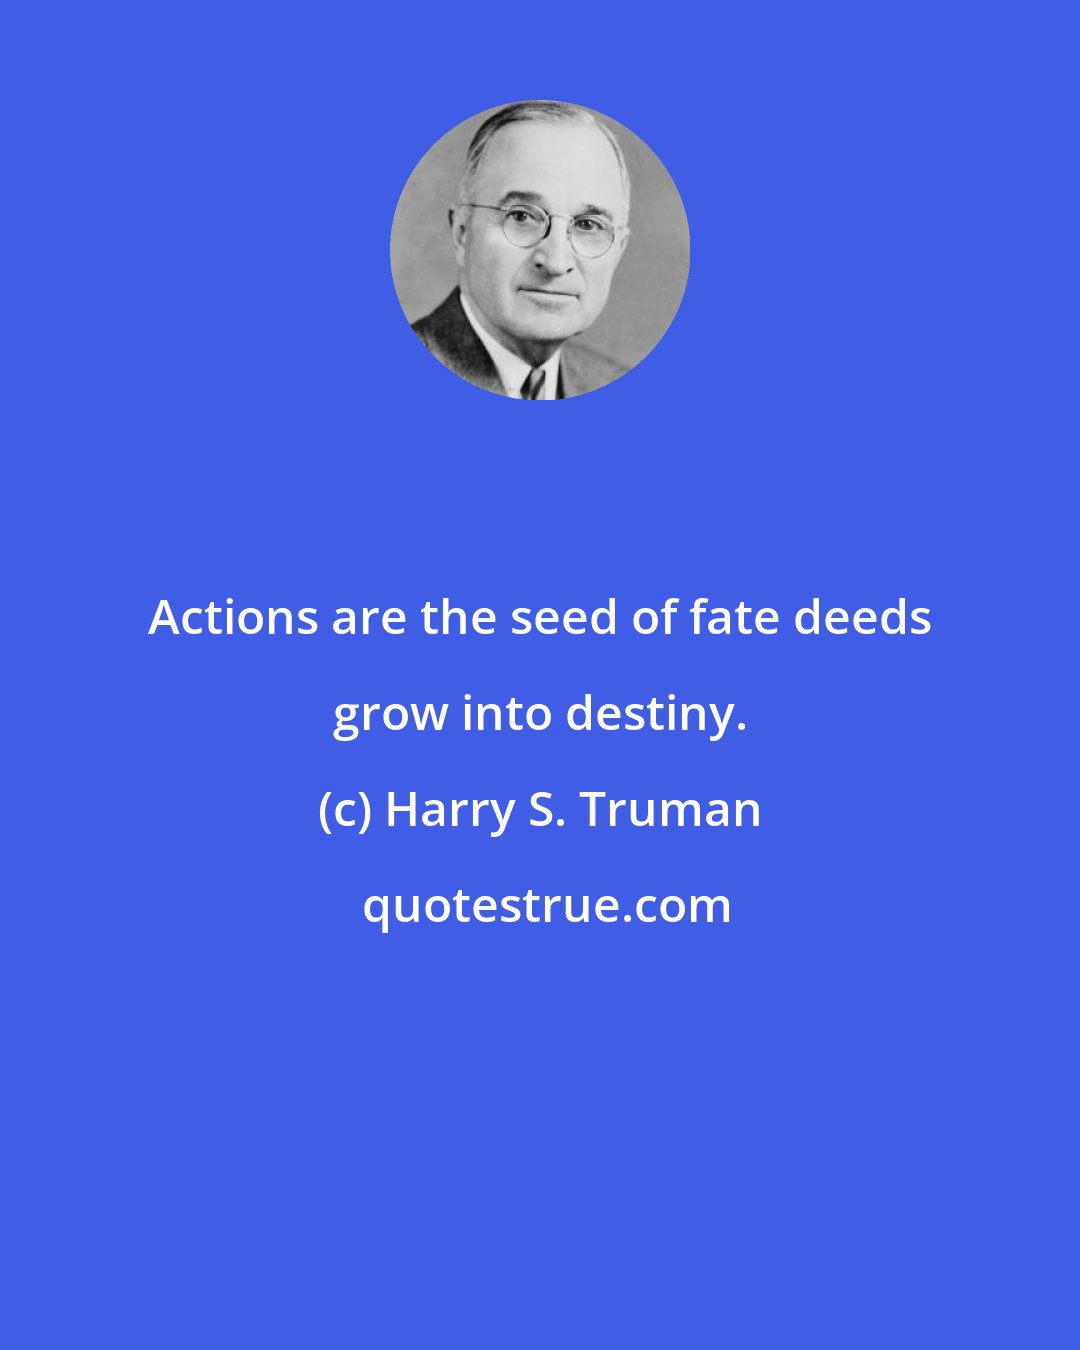 Harry S. Truman: Actions are the seed of fate deeds grow into destiny.